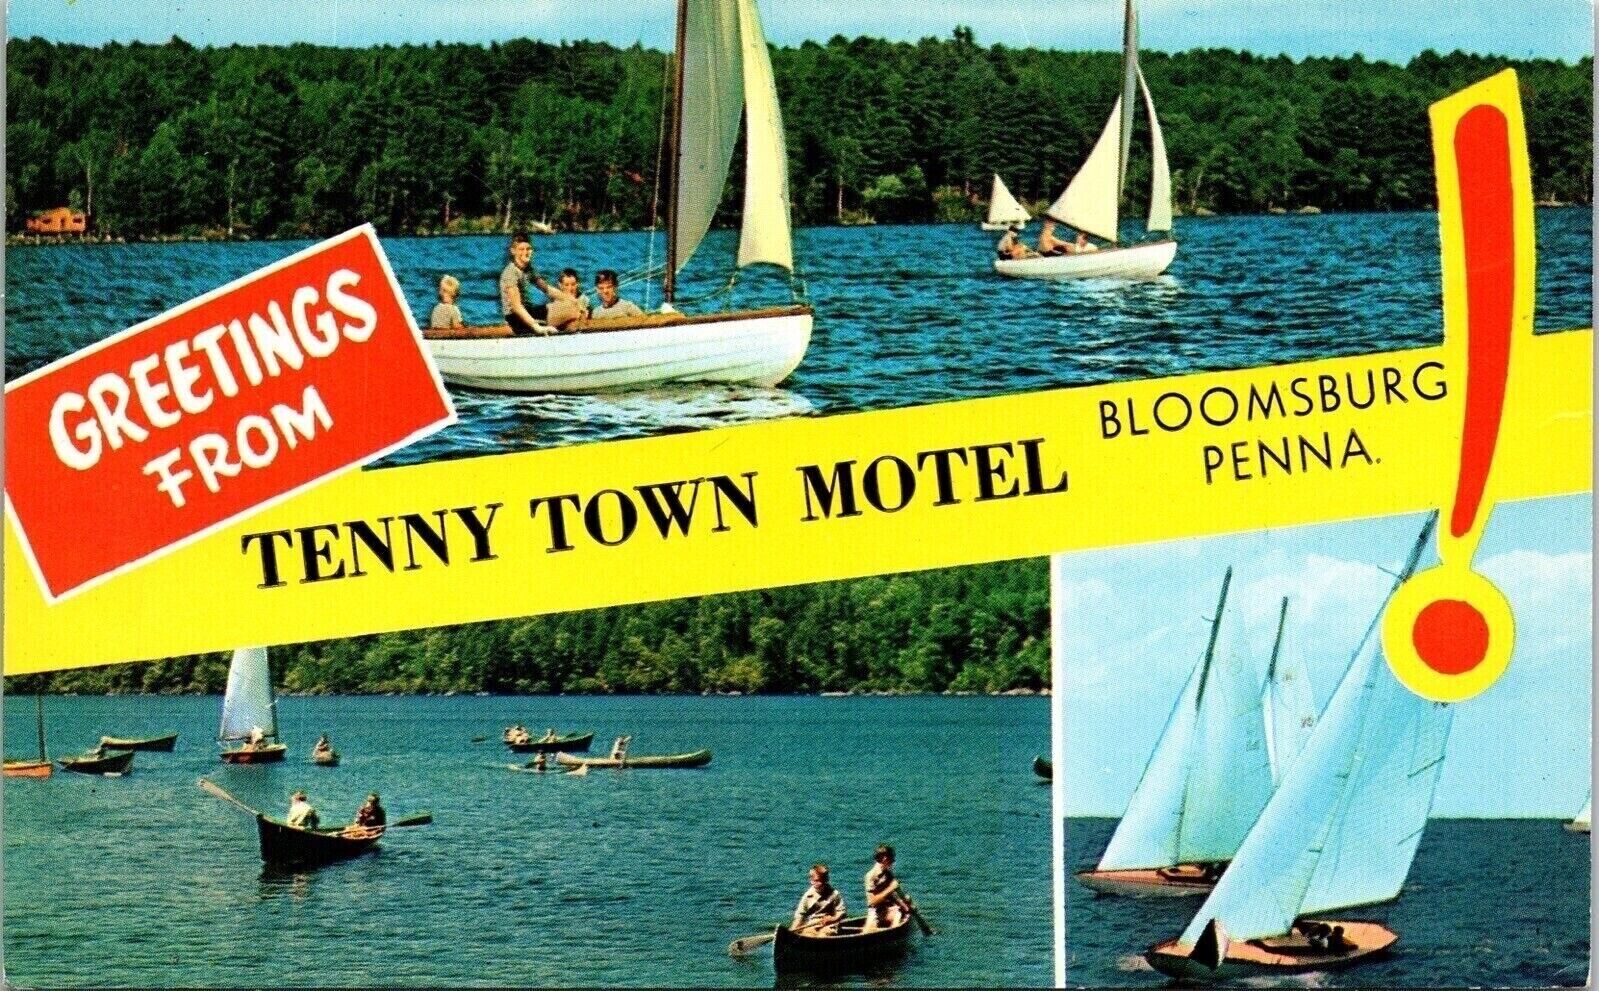 Greetings From Tenny Town Motel Bloomsburg PA Sailboats Multiview Postcard UNP